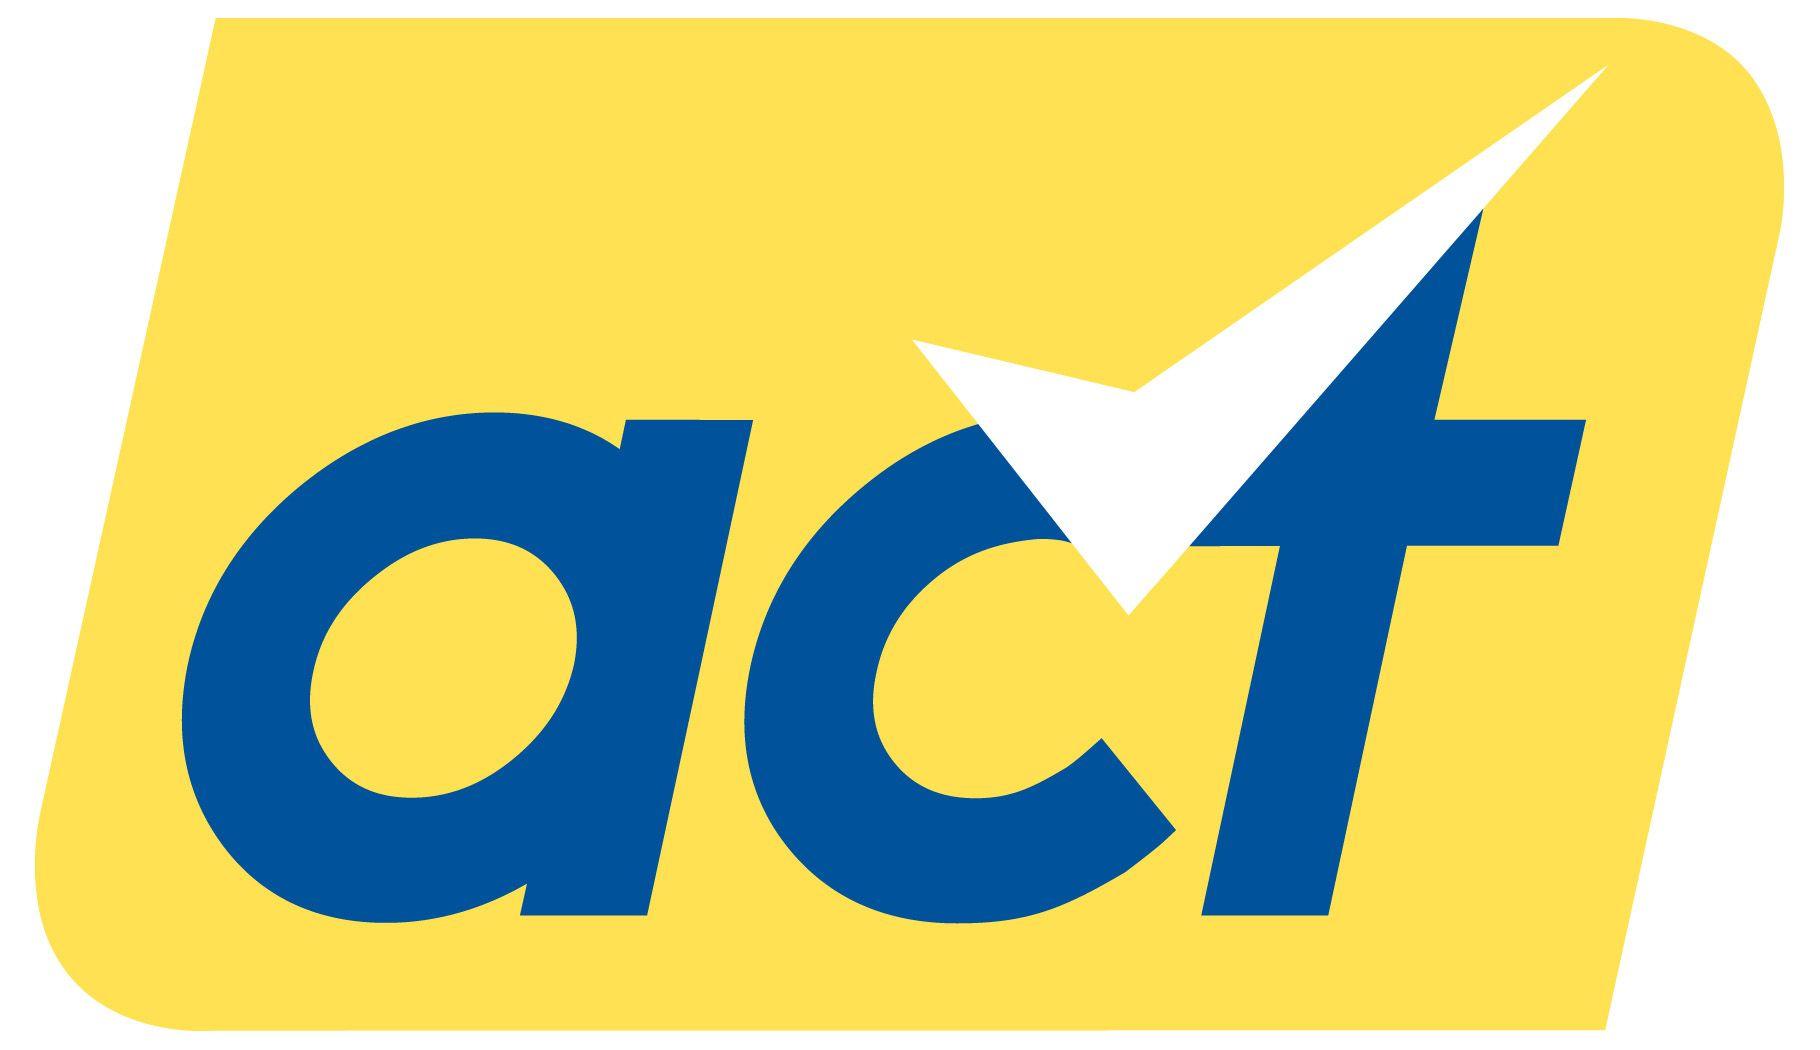 Act Logo - Registration of substitute logo for ACT New Zealand. Electoral